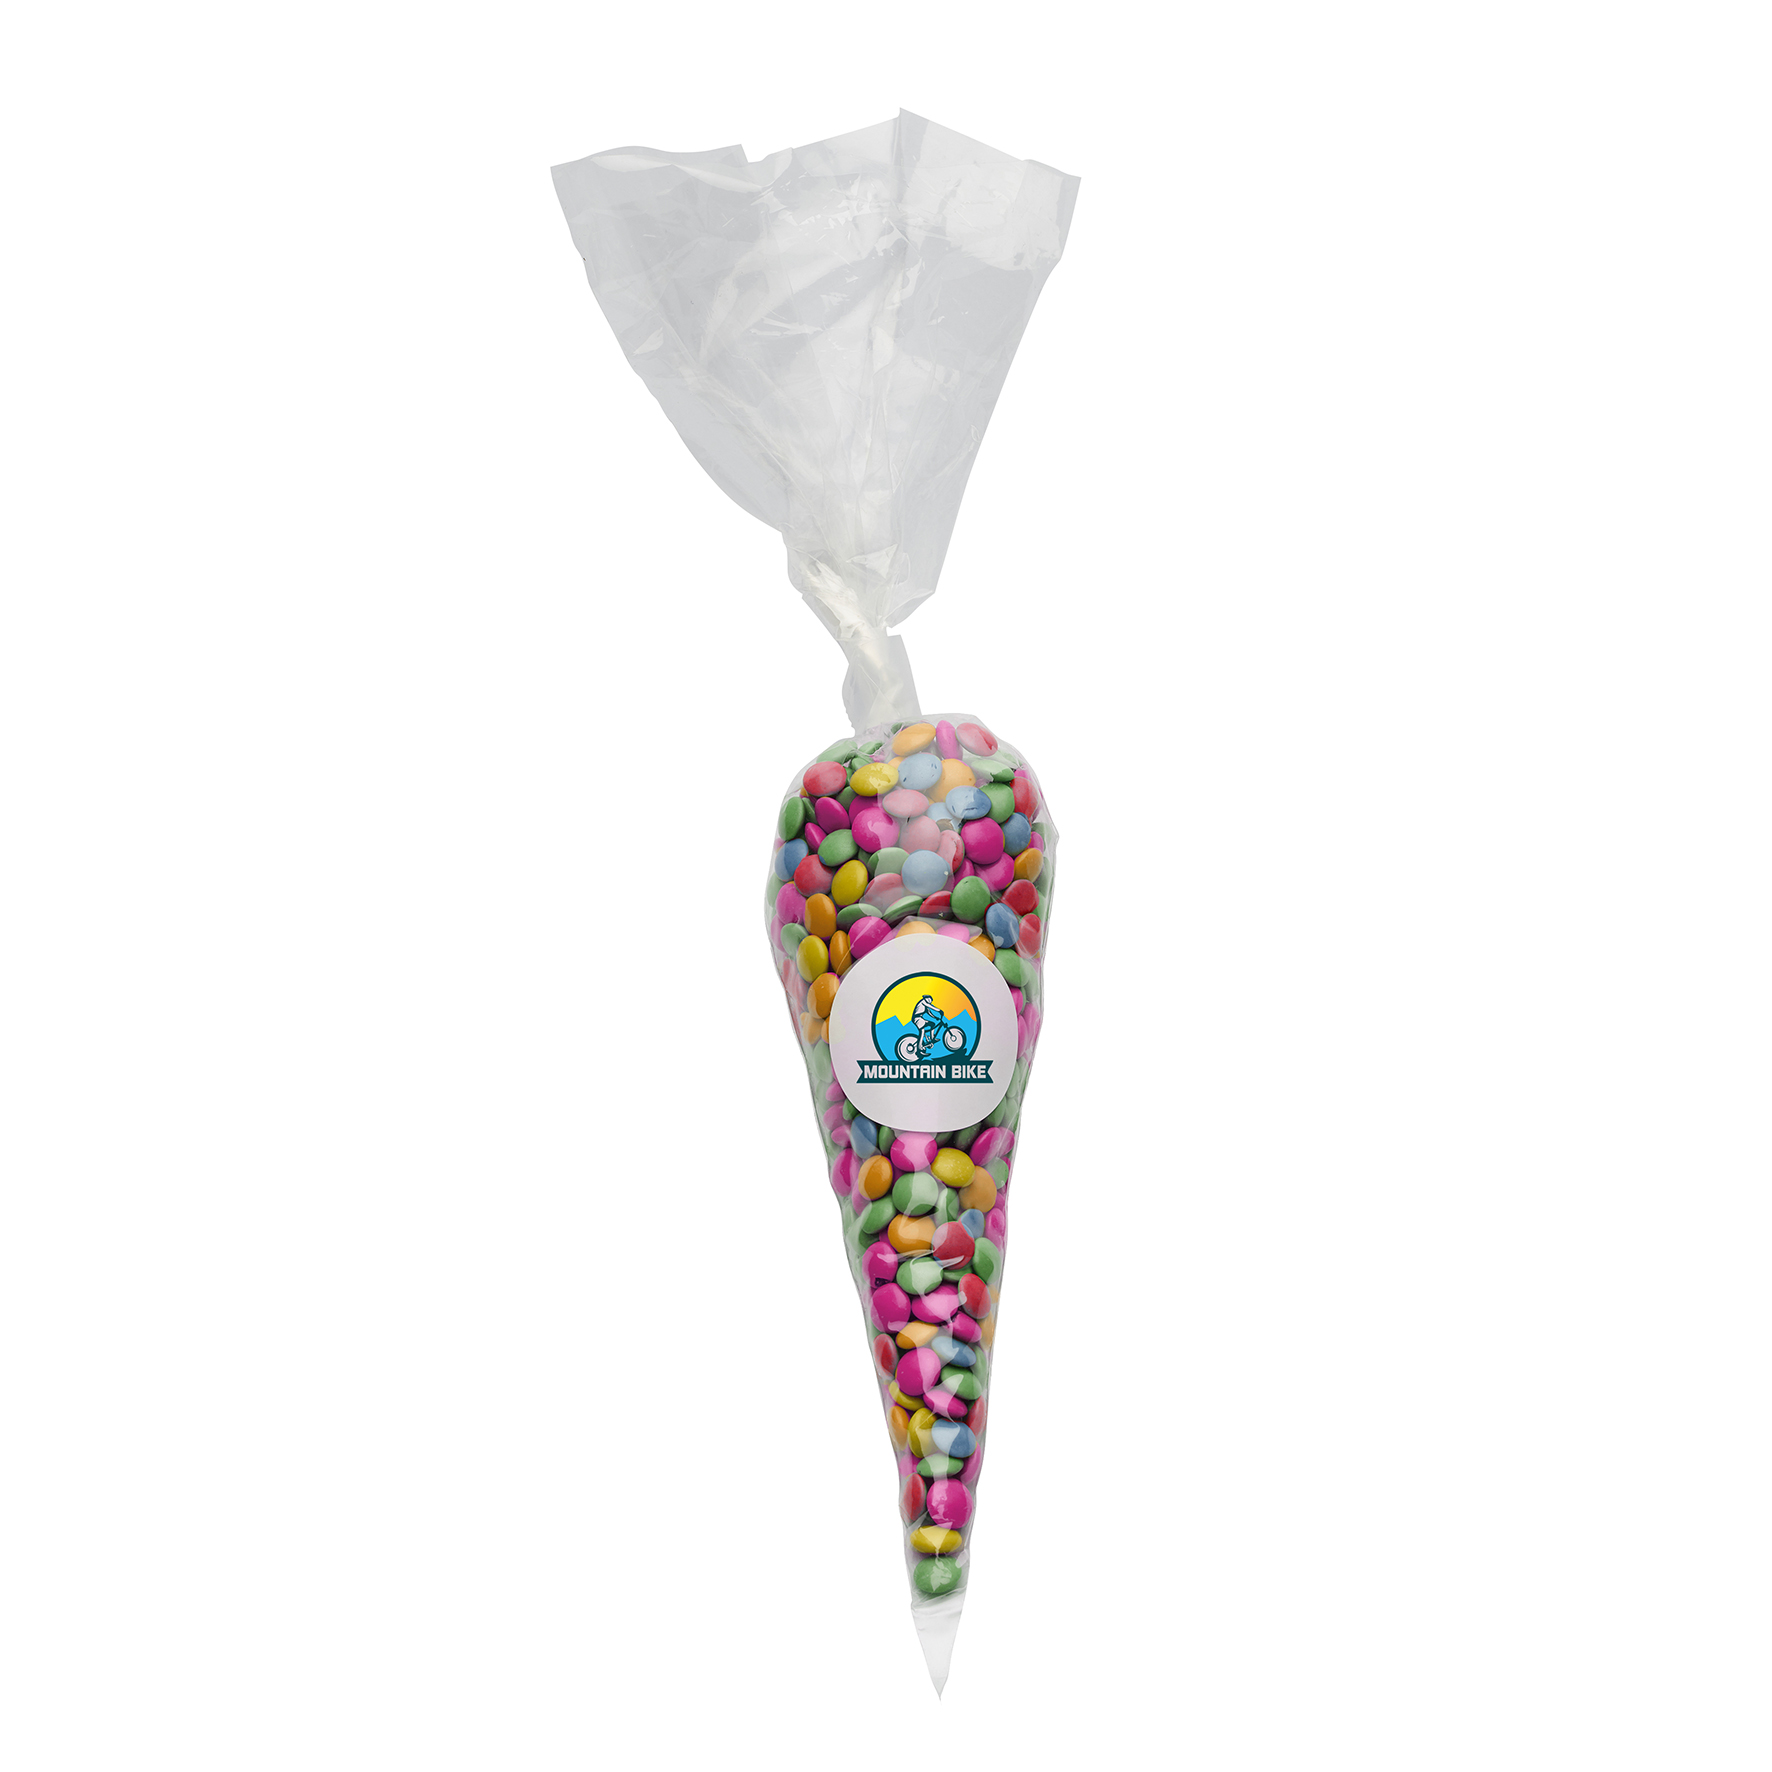 c 0605ch 00 09 - Sweet cones with gummy bears (220g)